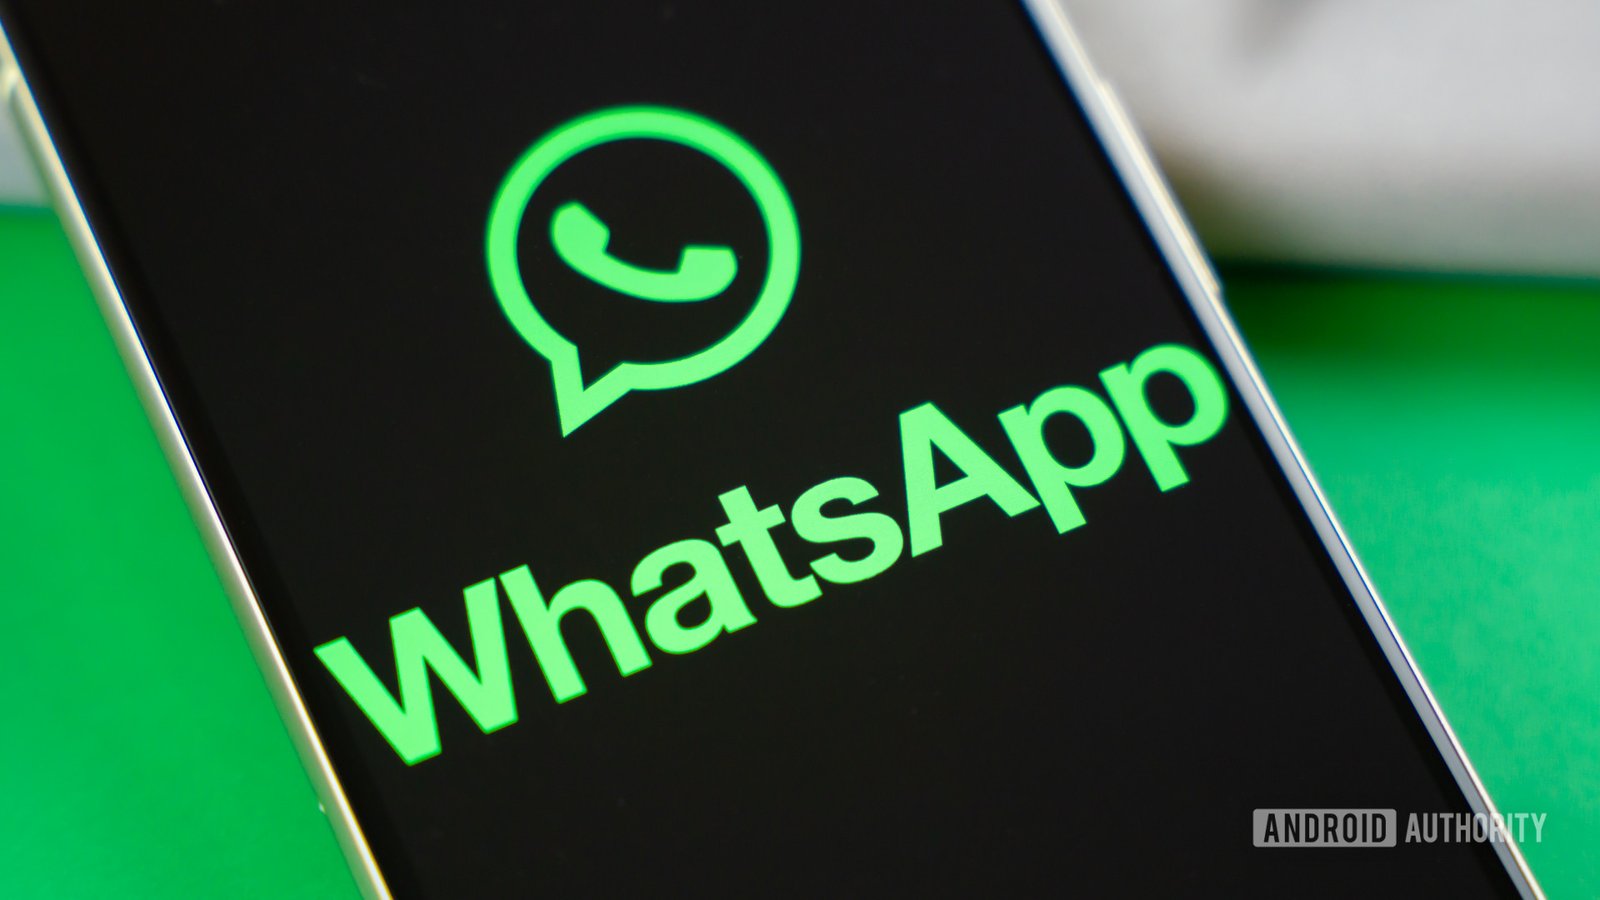 WhatsApp’s latest Android betas reveal two new features coming to the app